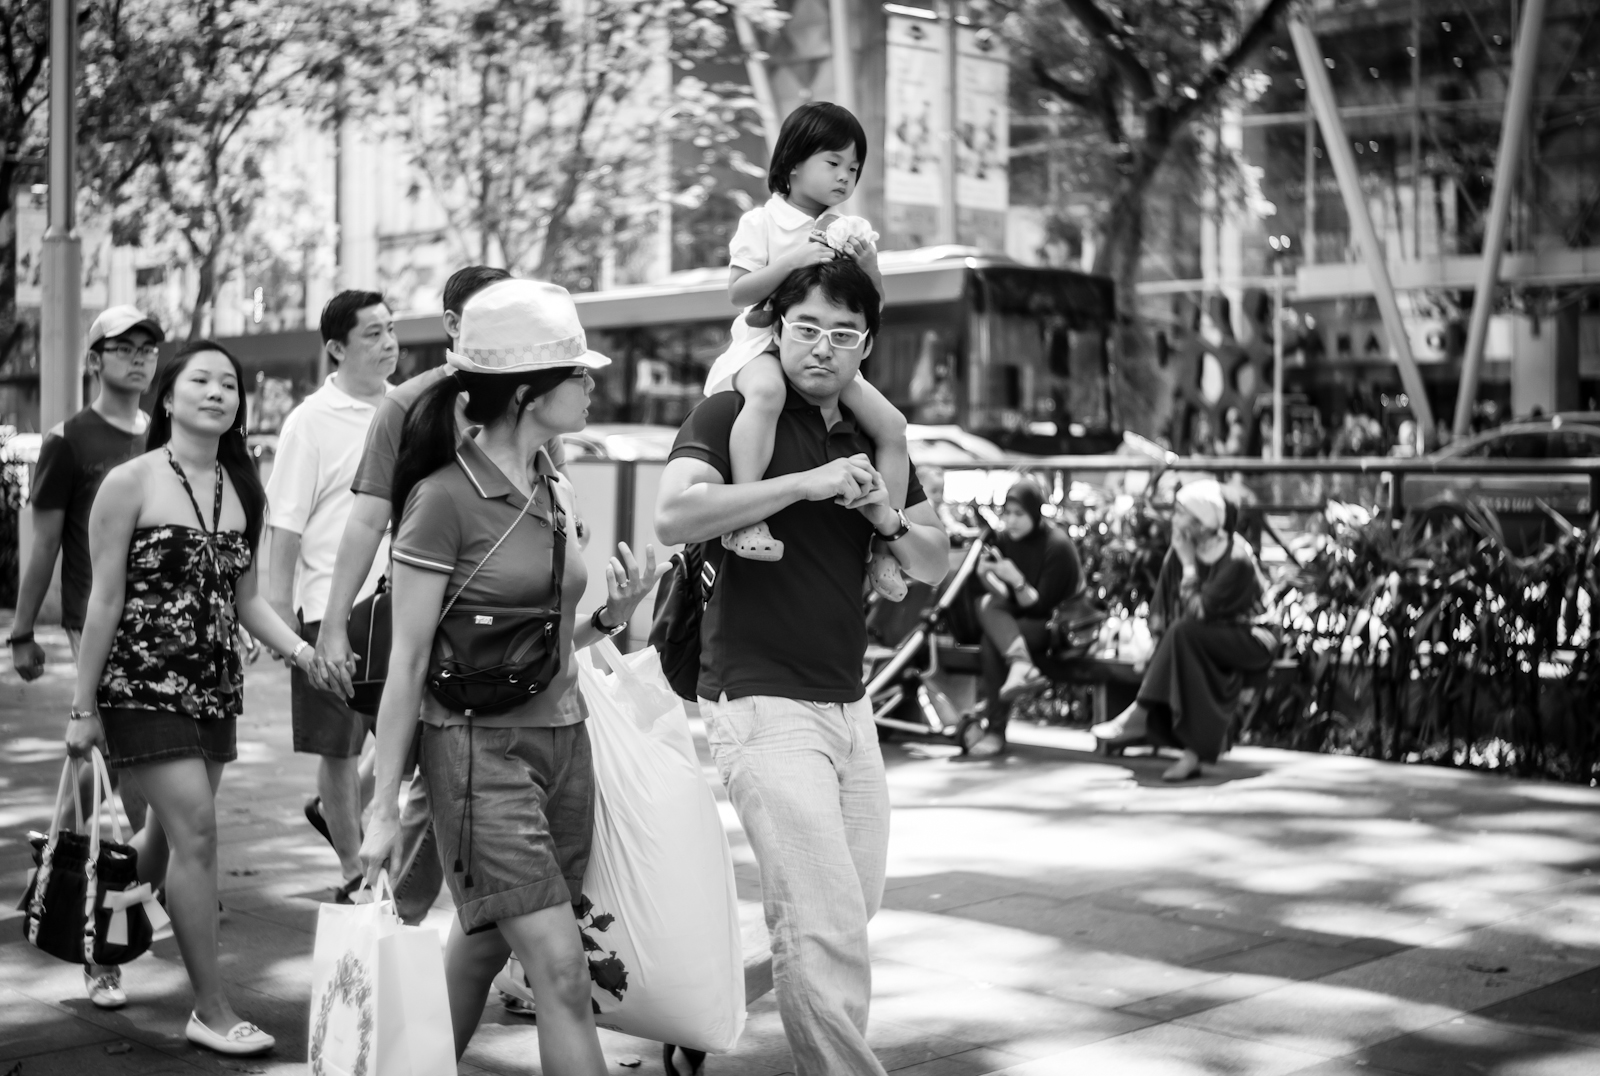 Street photography - family walking along Orchard Road